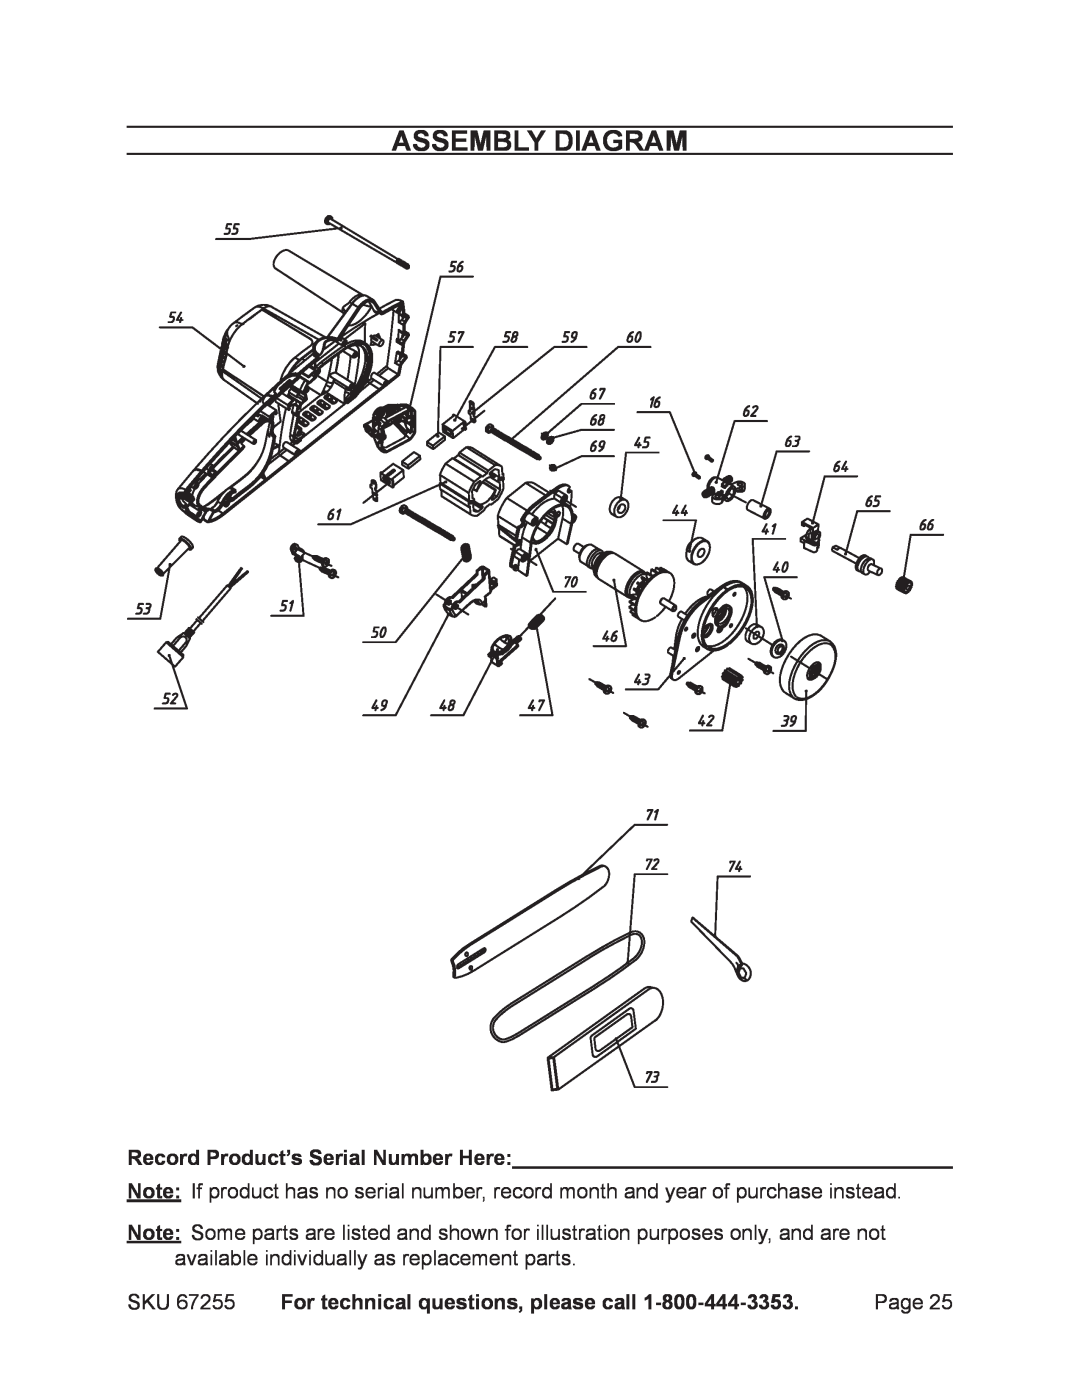 Harbor Freight Tools 67255 Assembly Diagram, Record Product’s Serial Number Here, For technical questions, please call 